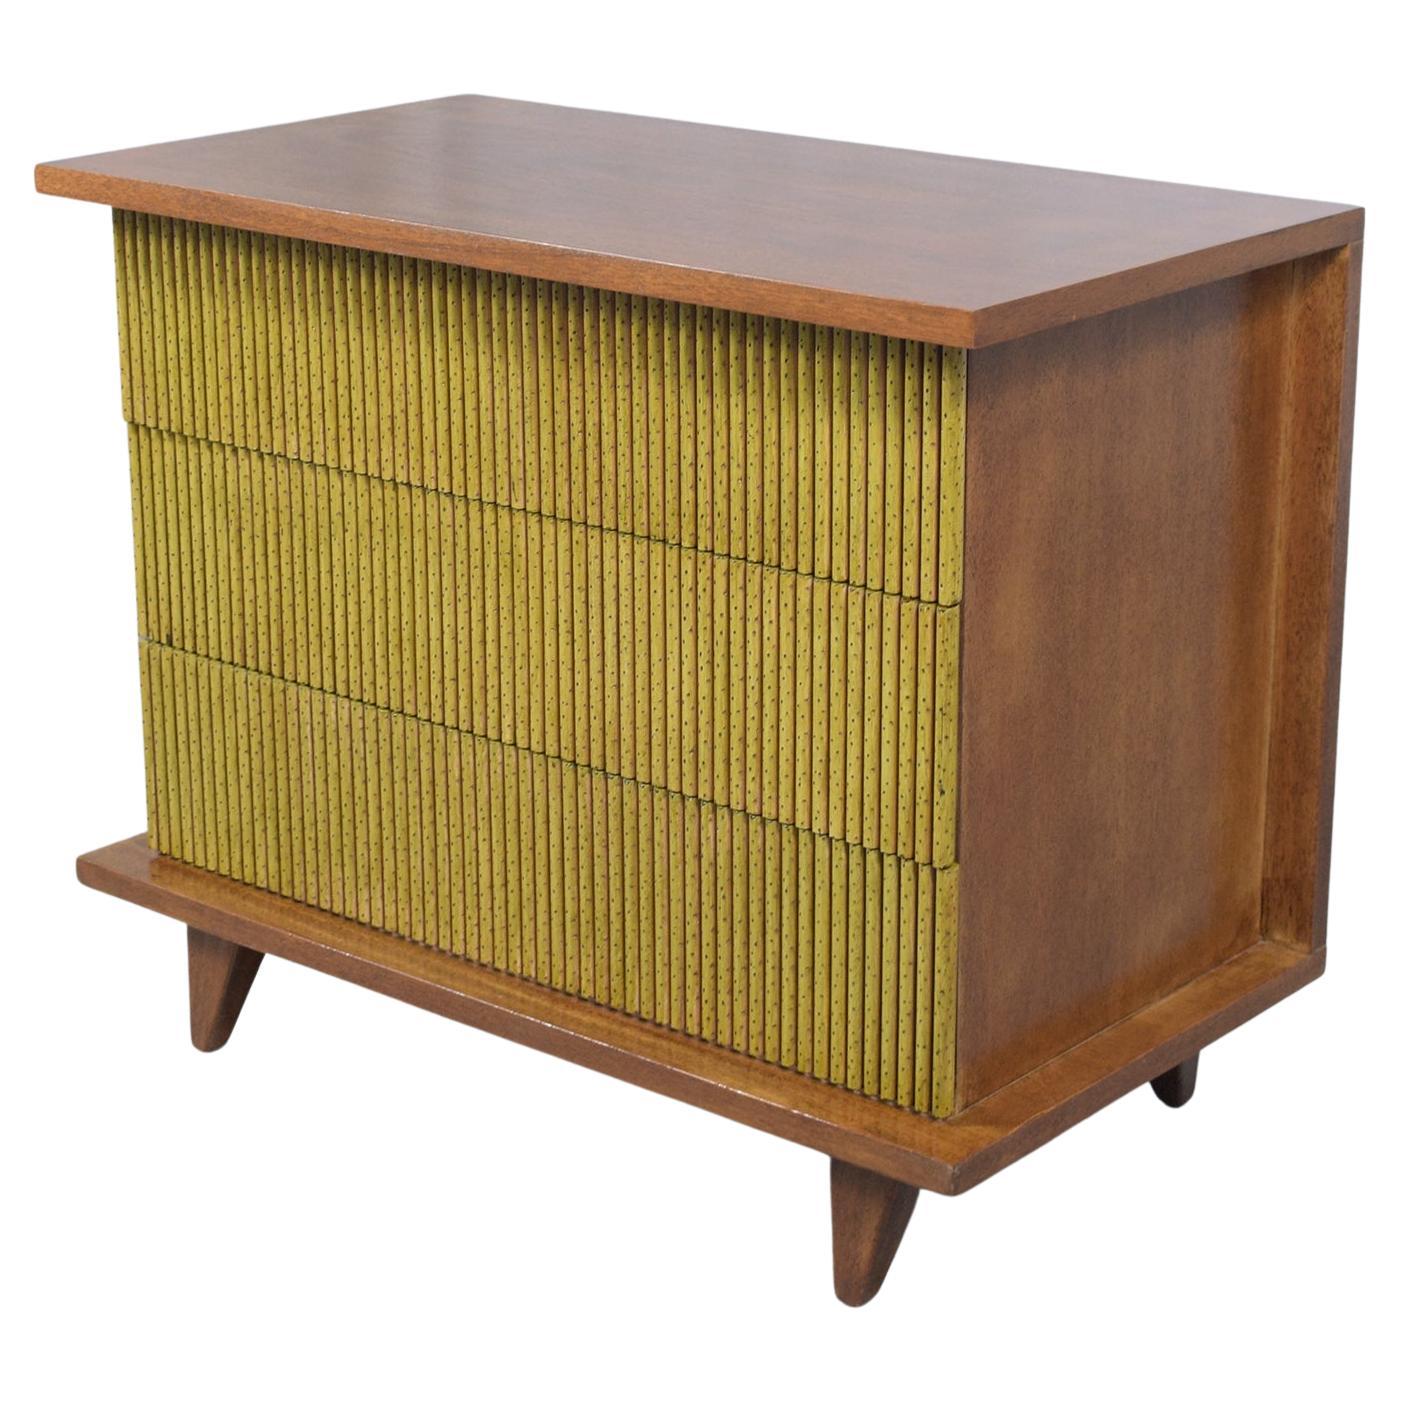 Step into the world of mid-century elegance with our beautifully restored chest of drawers, a testament to the timeless design and craftsmanship of the era. This exquisite piece, intricately crafted from high-quality mahogany wood, has been given